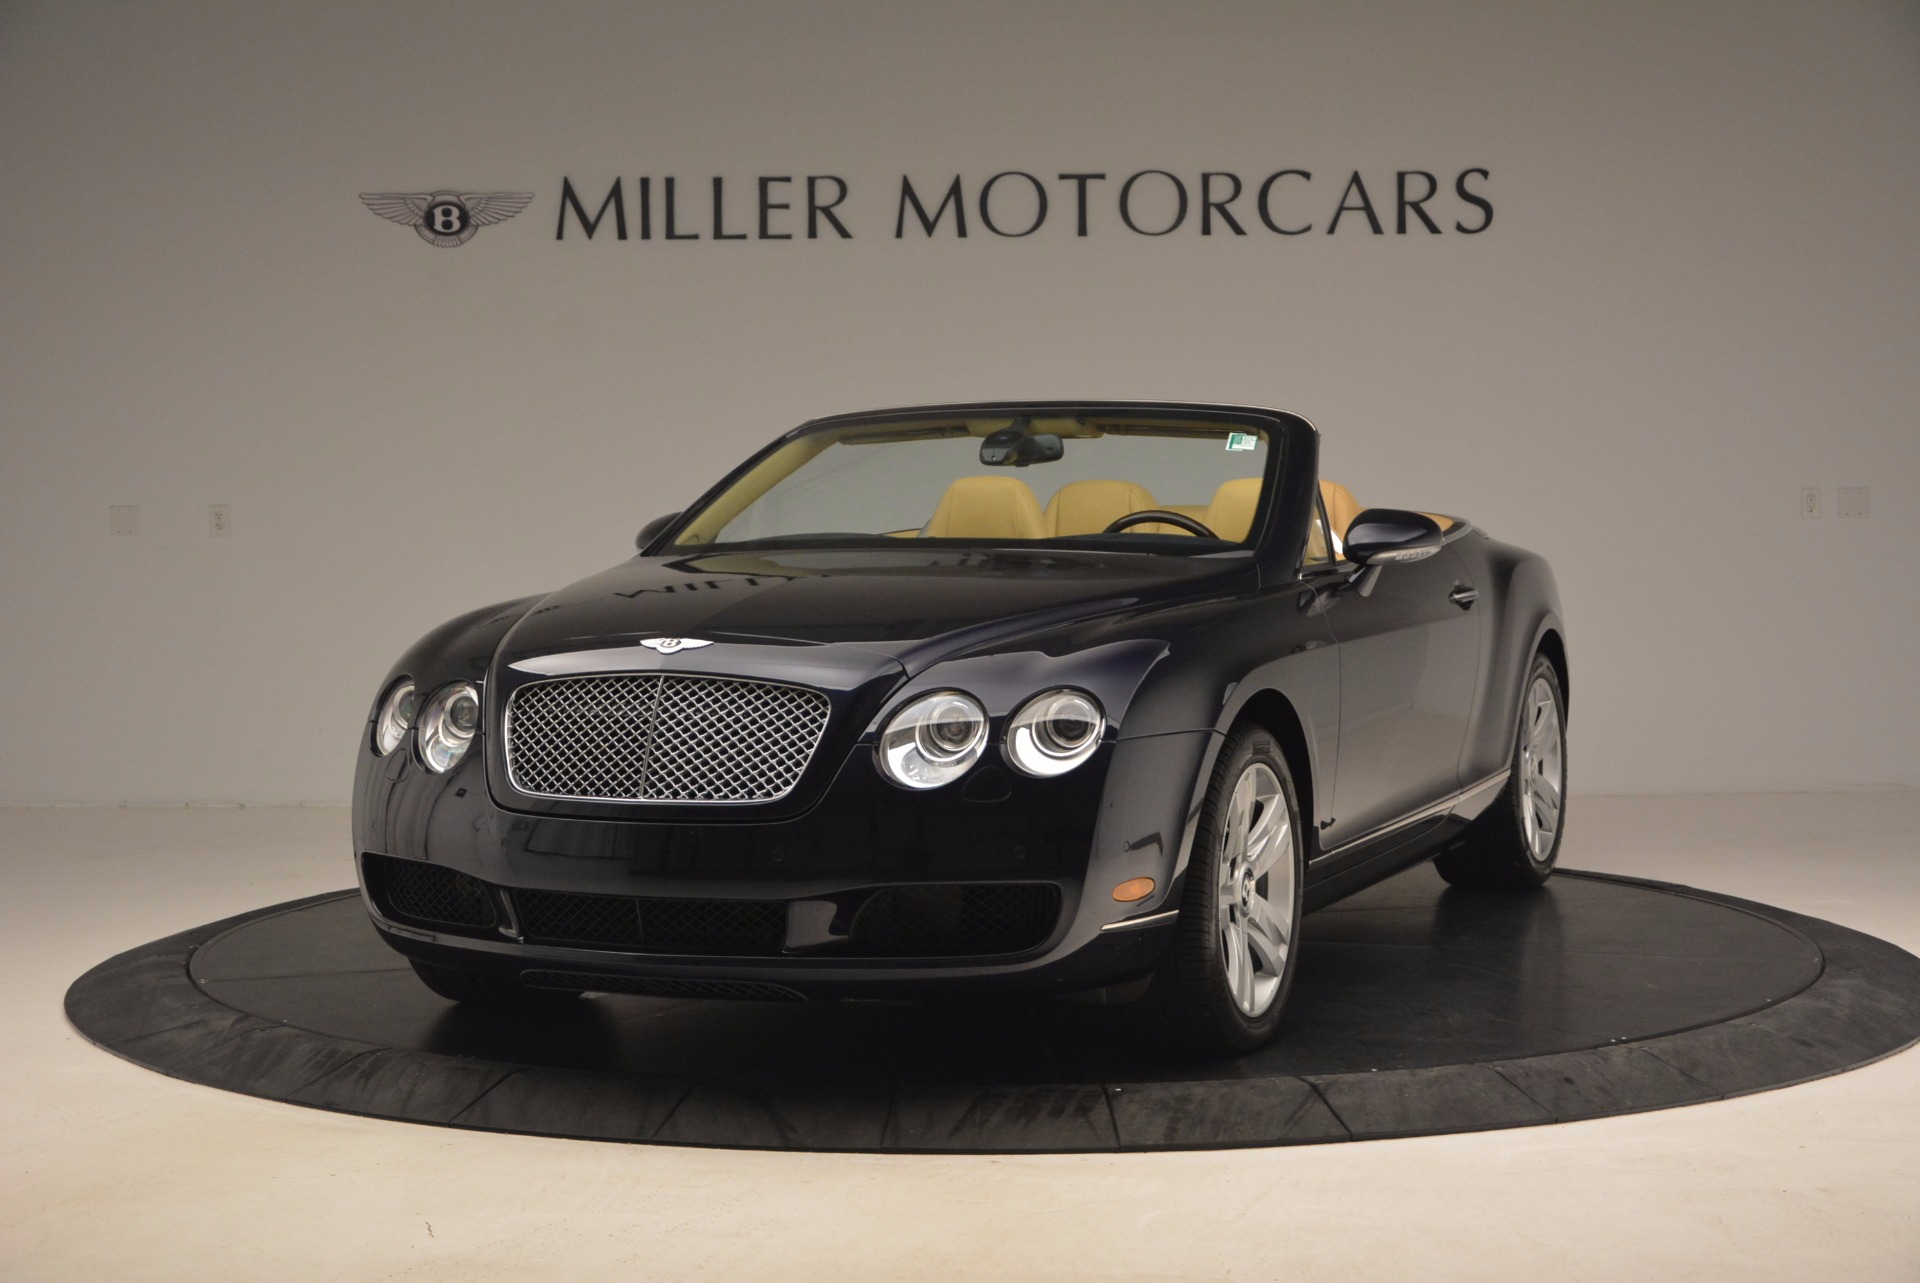 Used 2007 Bentley Continental GTC for sale Sold at Maserati of Westport in Westport CT 06880 1